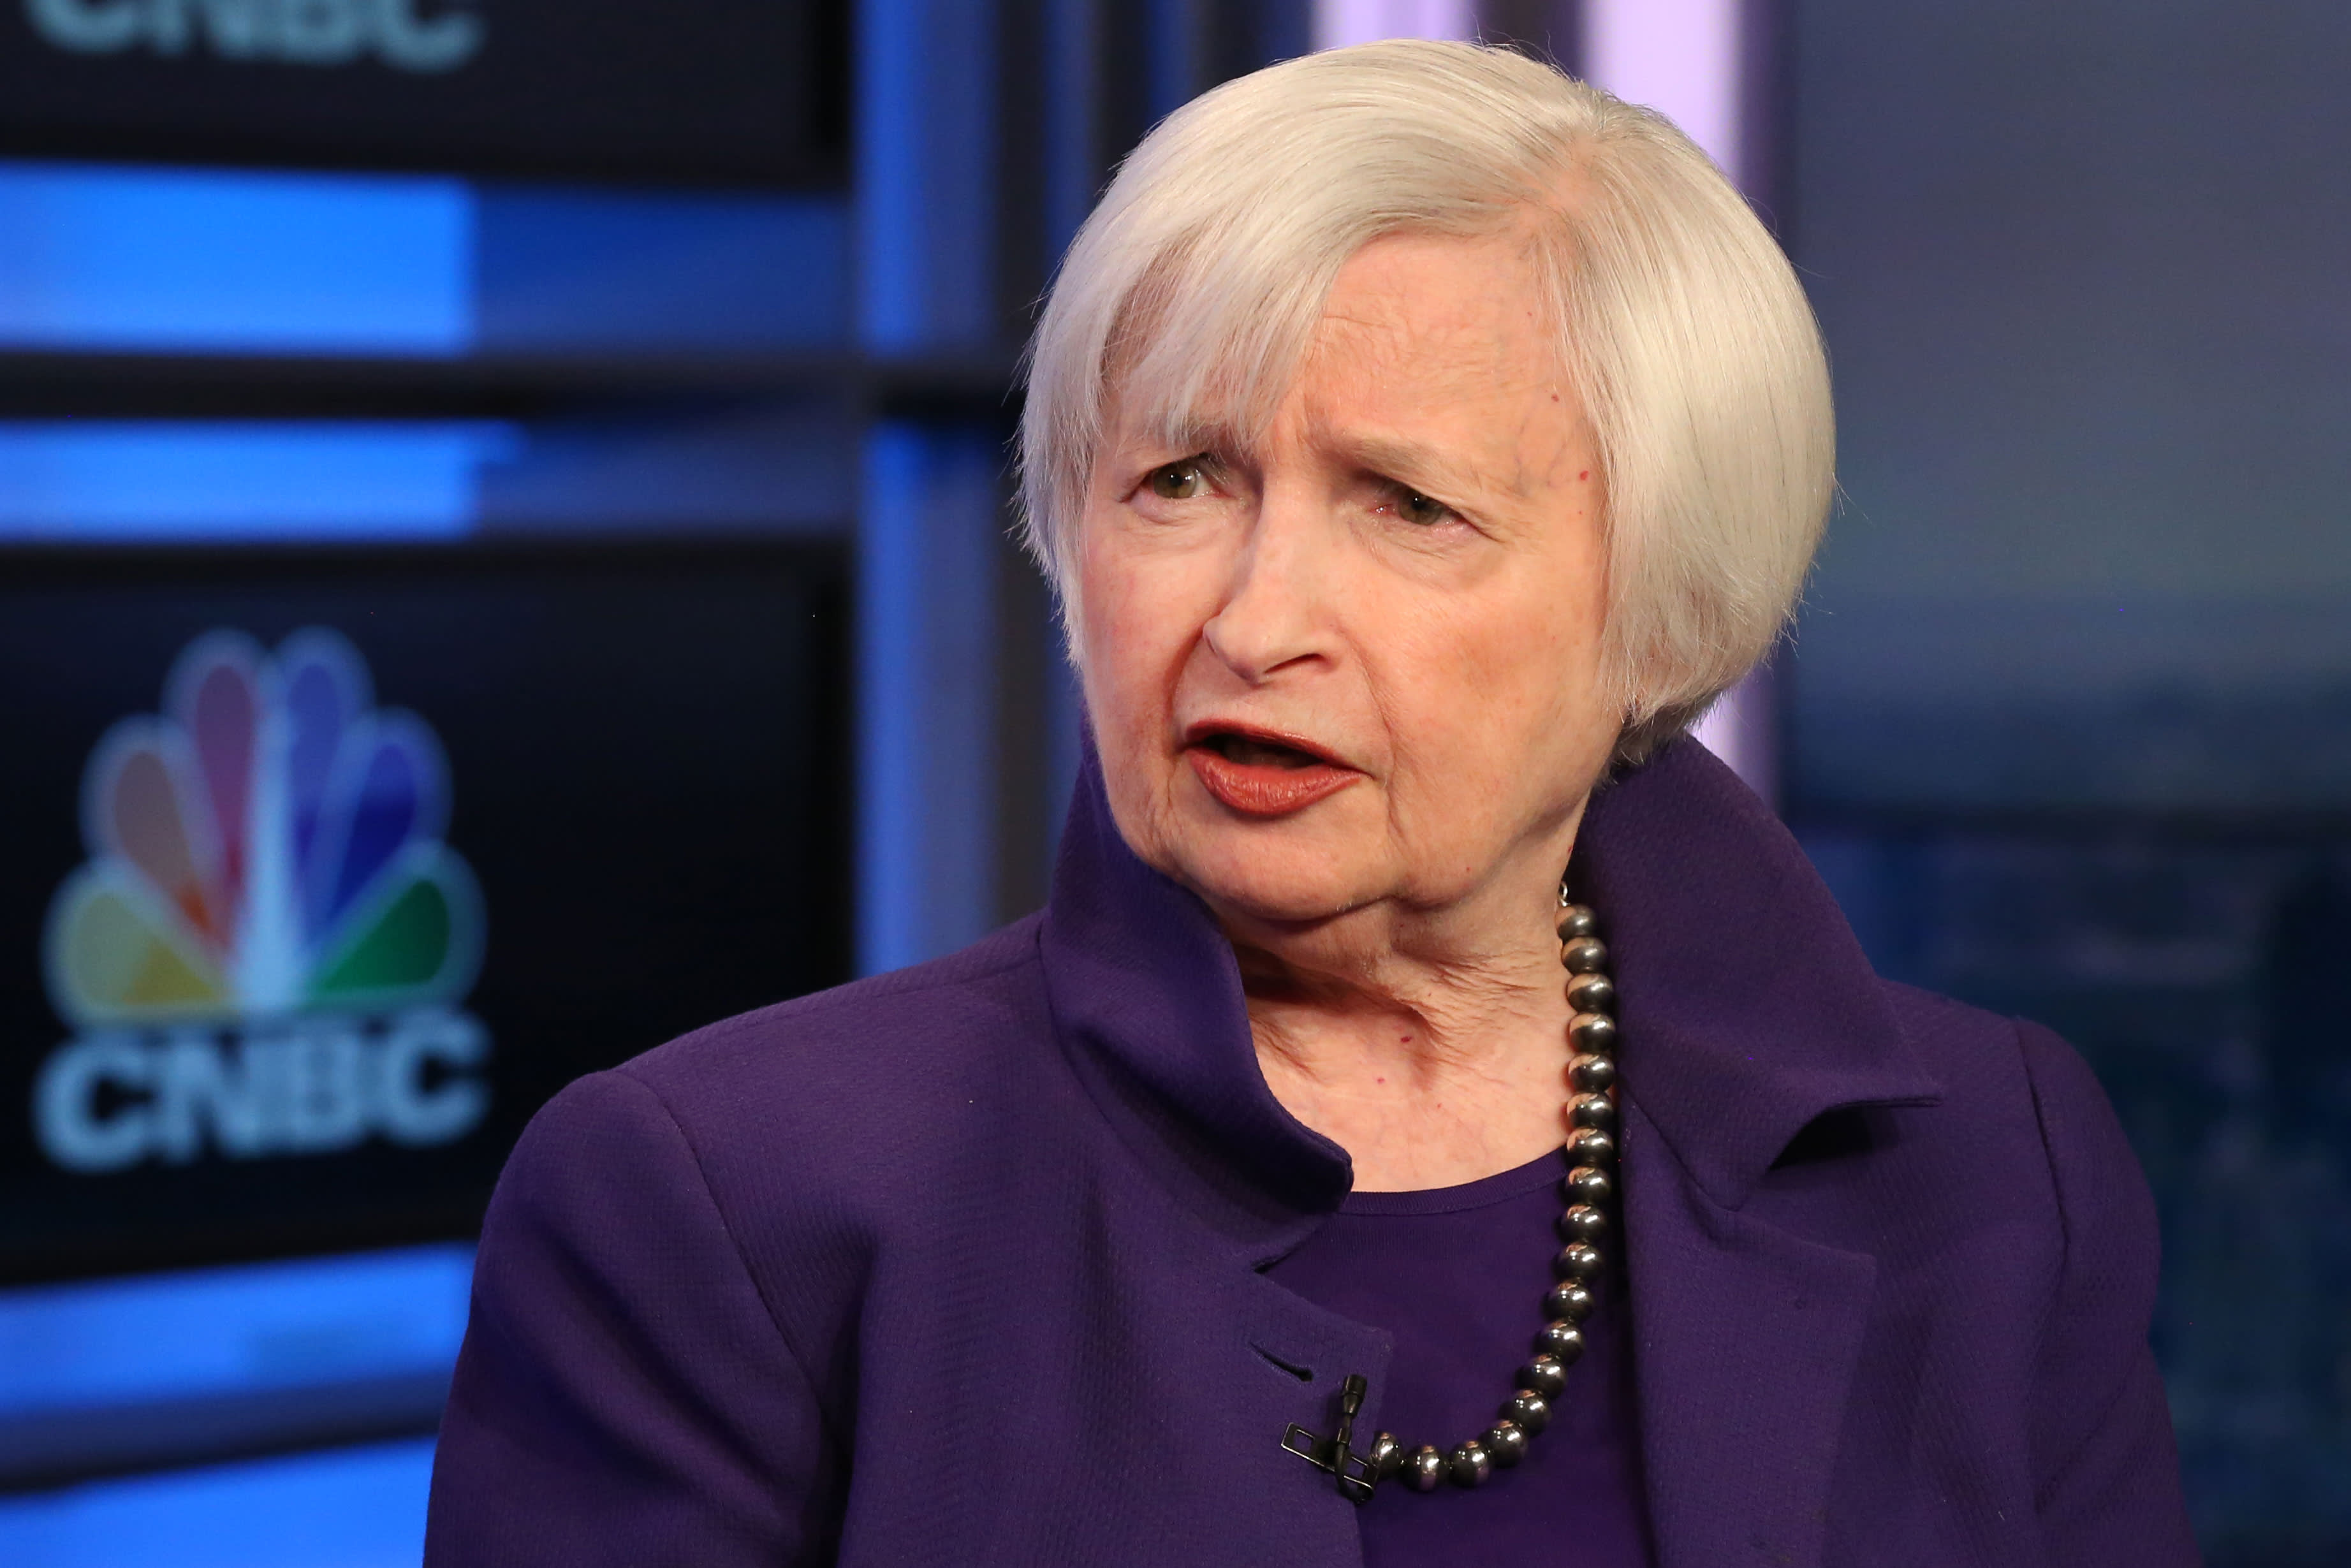 Treasury Minister Janet Yellen pushes for big stimulus, sees greater risk of not doing enough